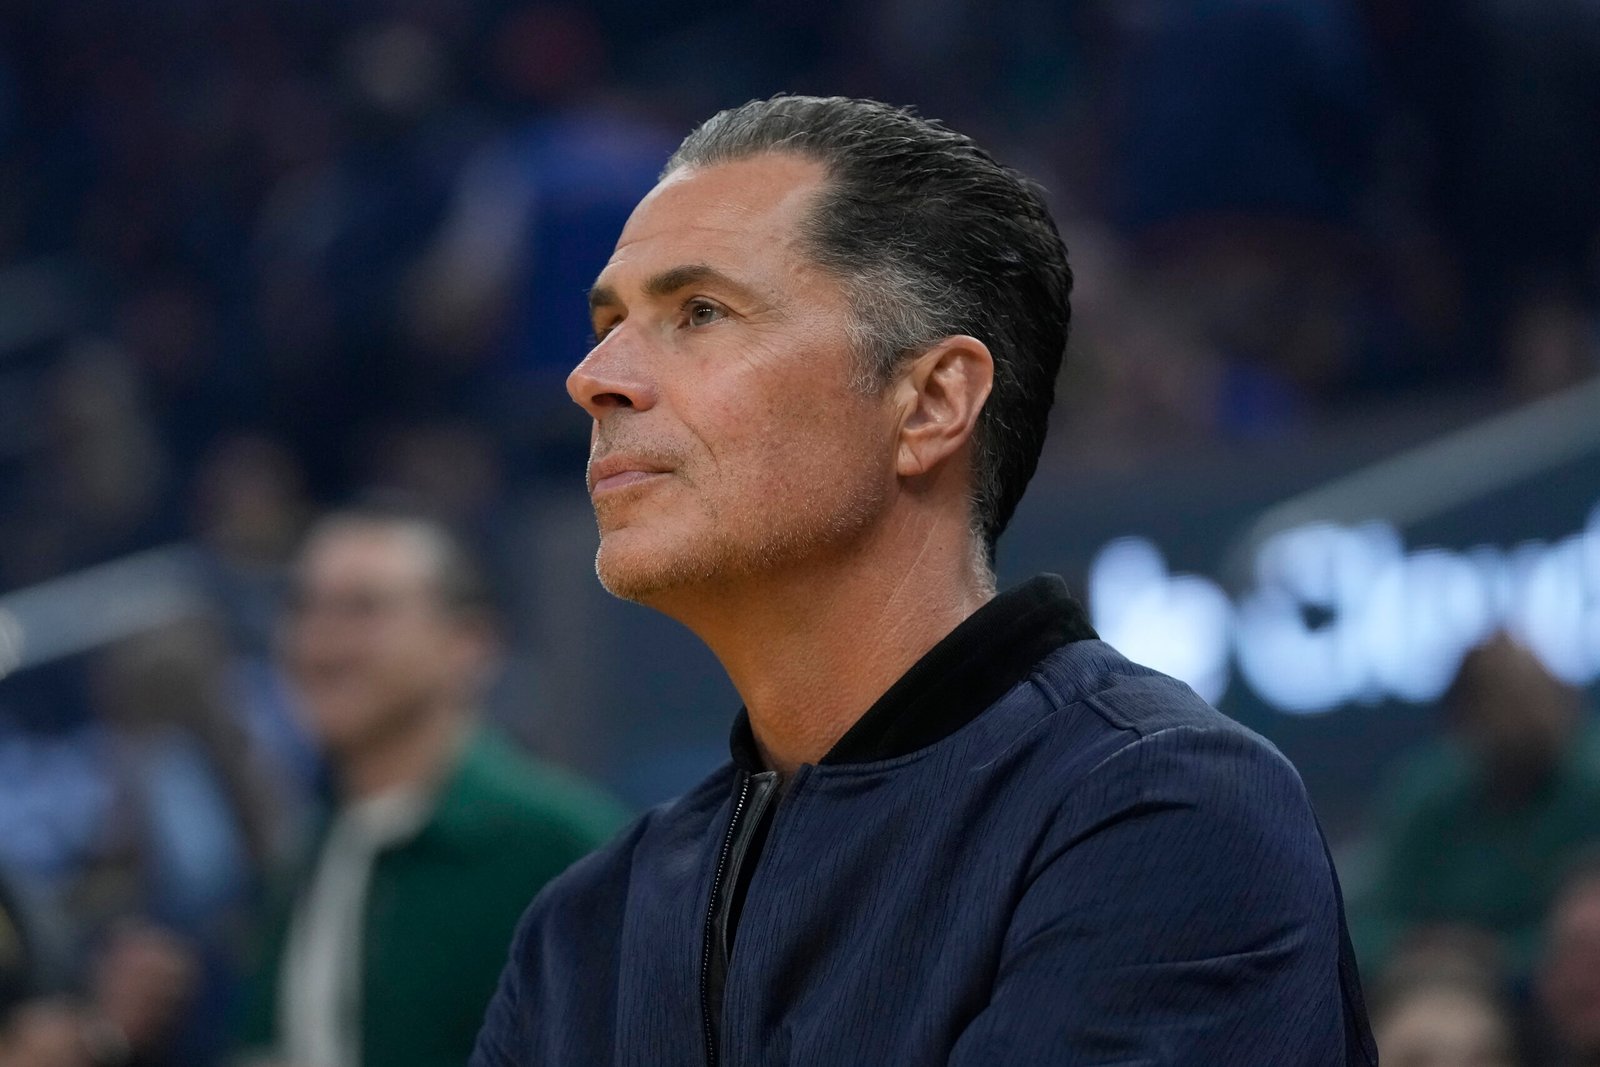 Snubbed by first choice, Lakers resume coaching search